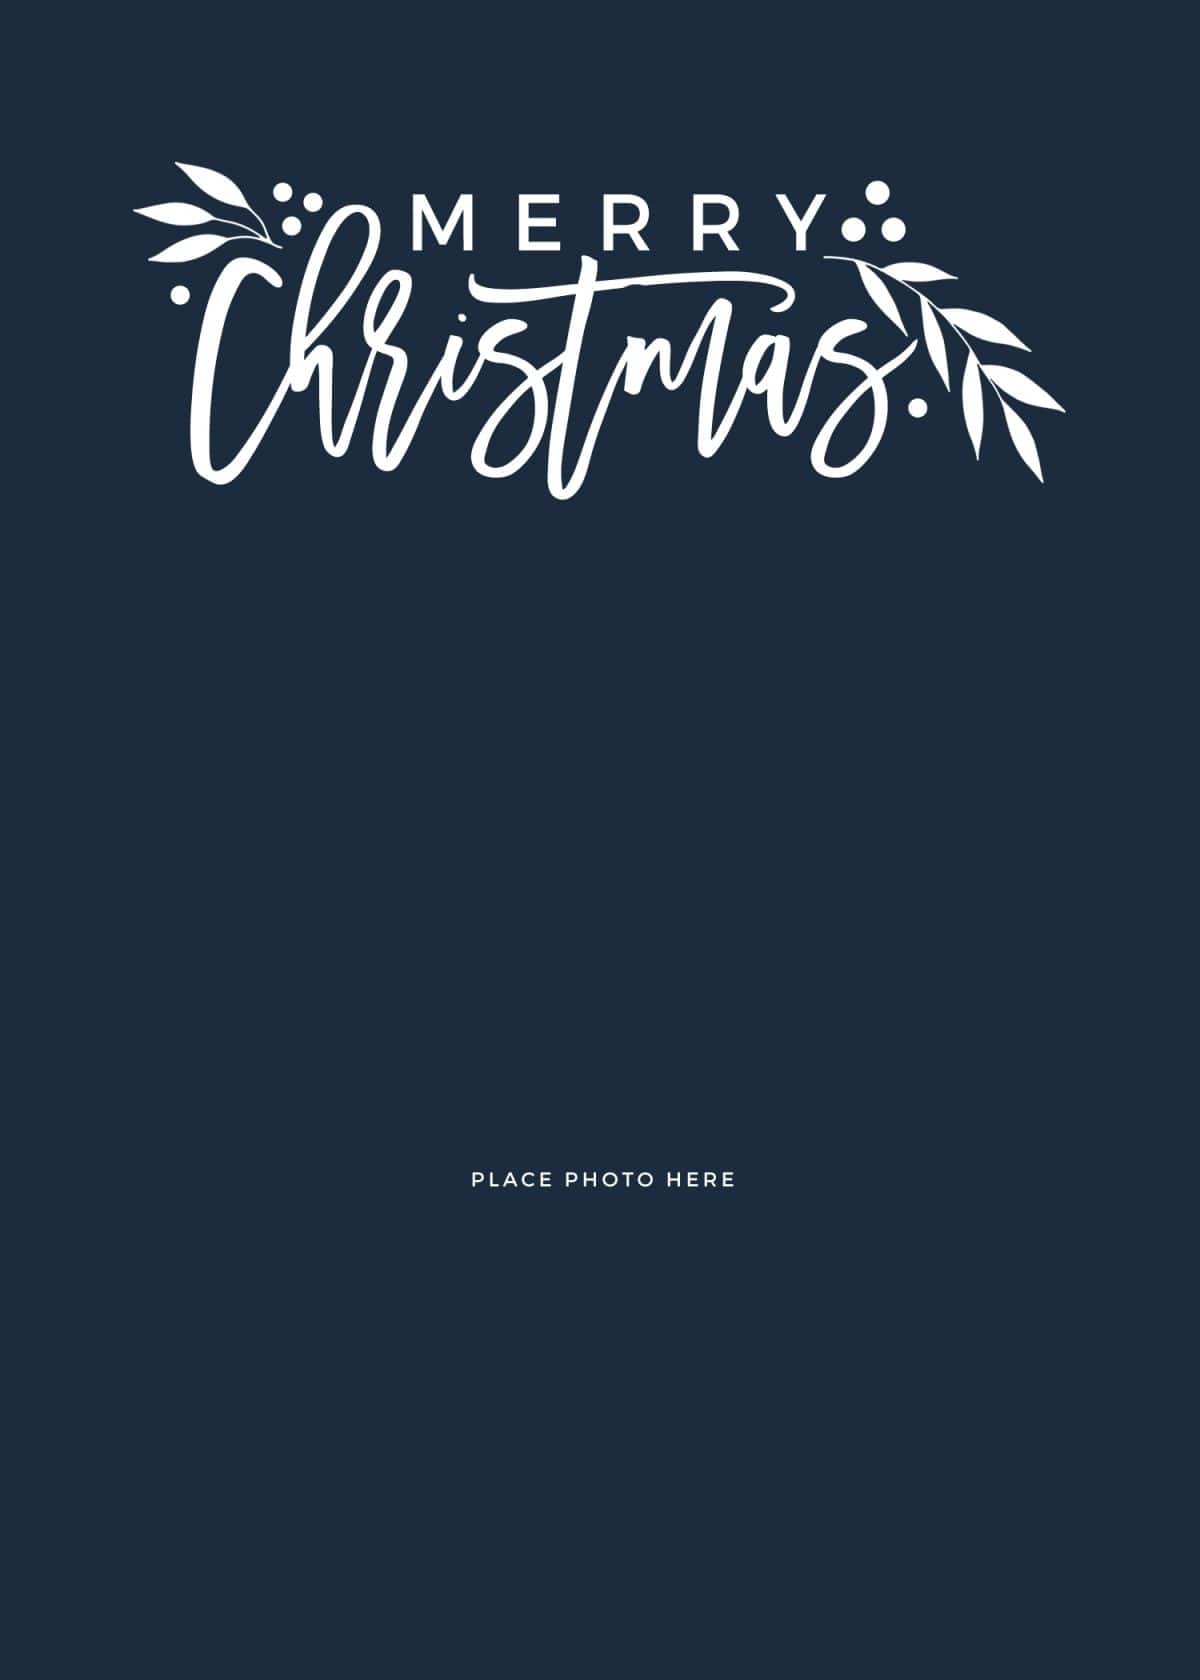 FREE Christmas Card Template Ideas Somewhat Simple